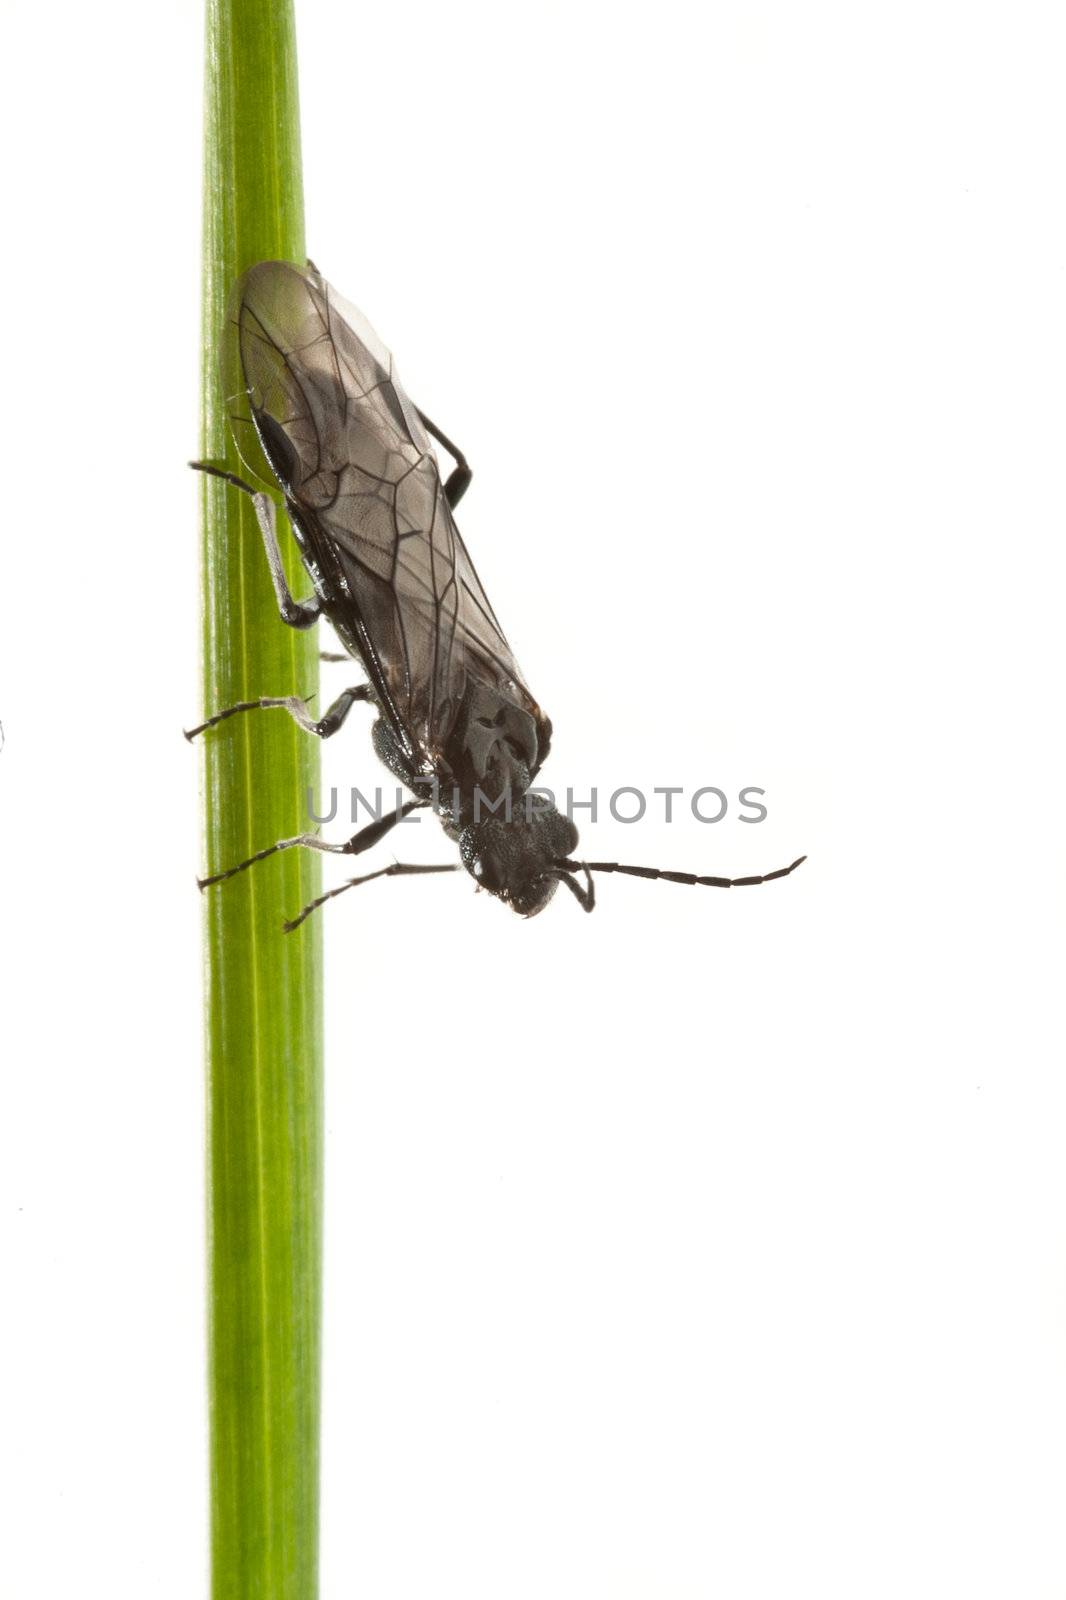 Single fly on a straw with white background